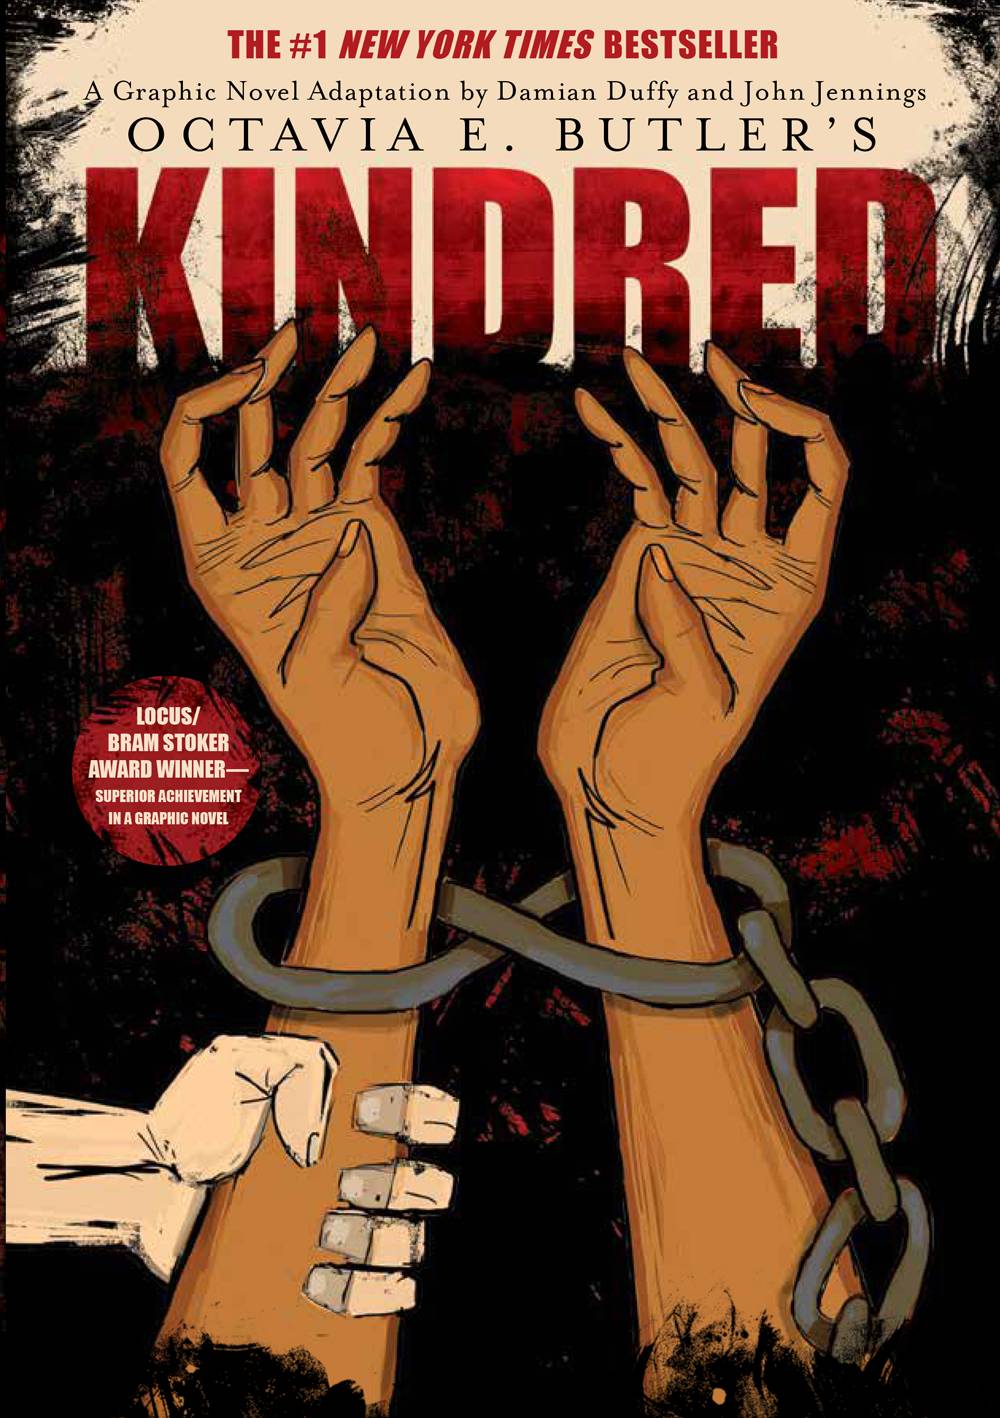 The cover of Kindred: A Graphic Novel Adaptation features two brown arms reaching upward, with chains around the wrists. A white hand grabs the left arm. Artwork by John Jennings. Image courtesy of Damian Duffy.